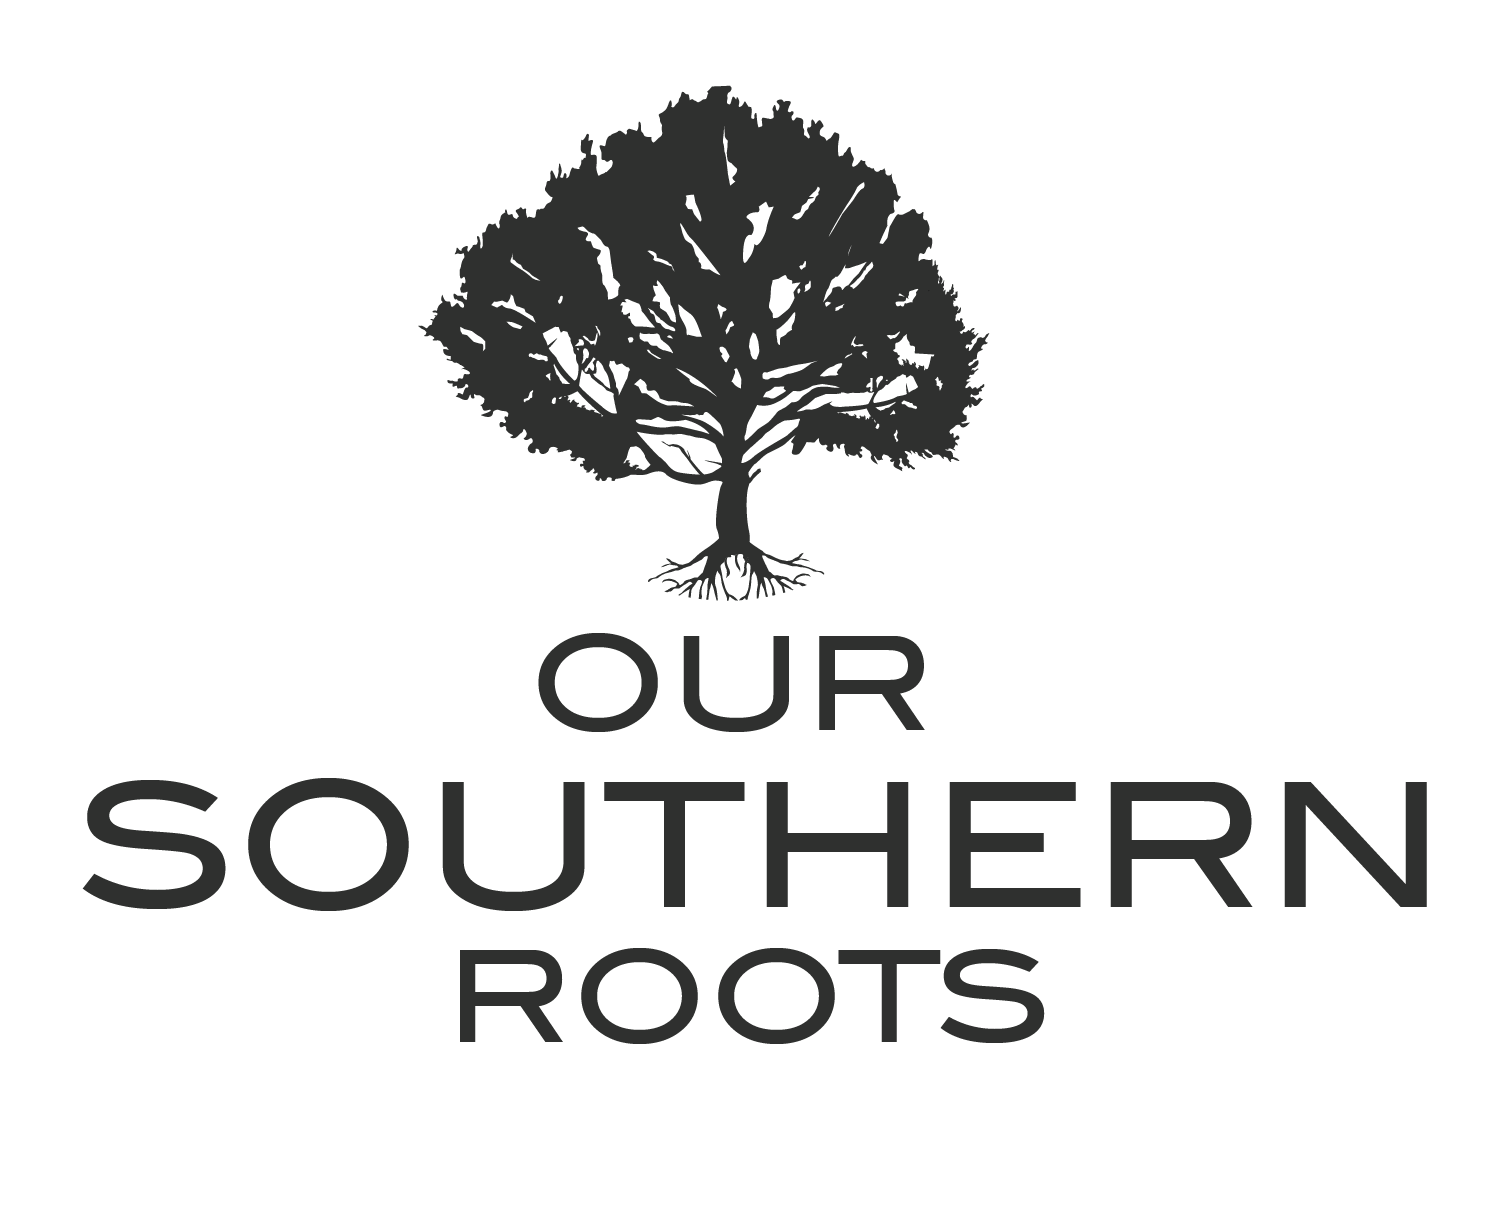 Our Southern Roots